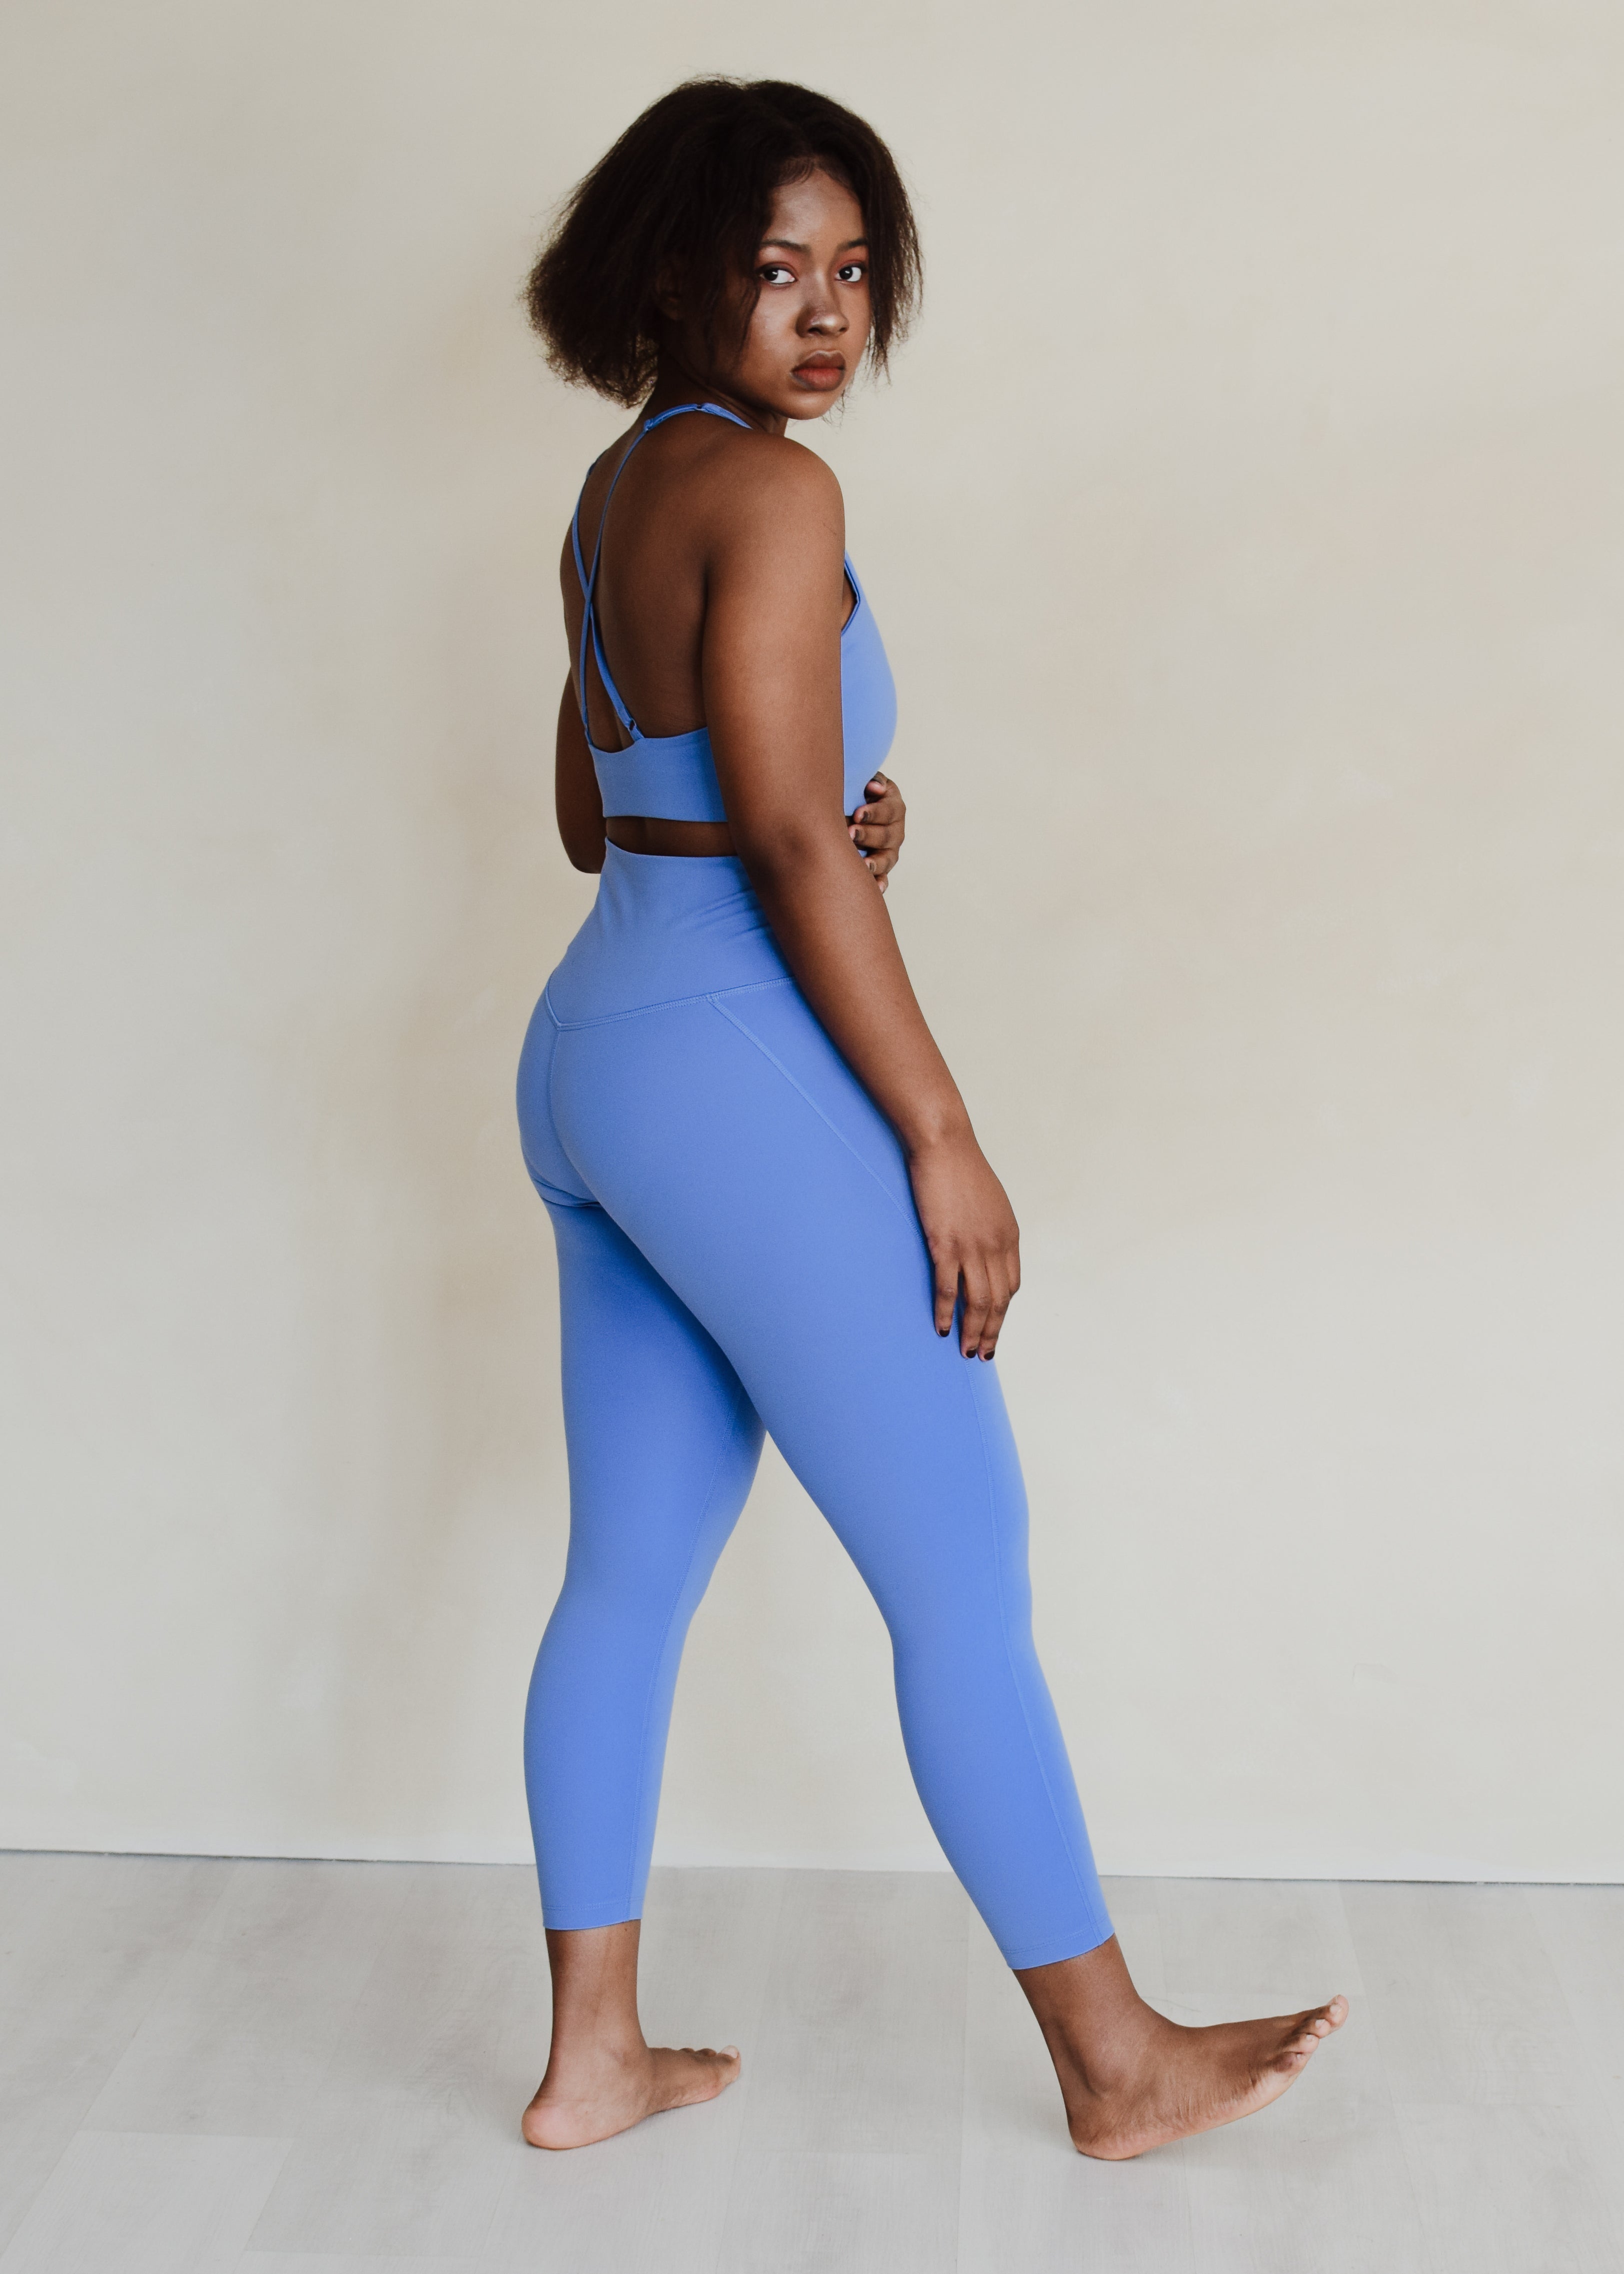 Are Girlfriend Collective Leggings Good?